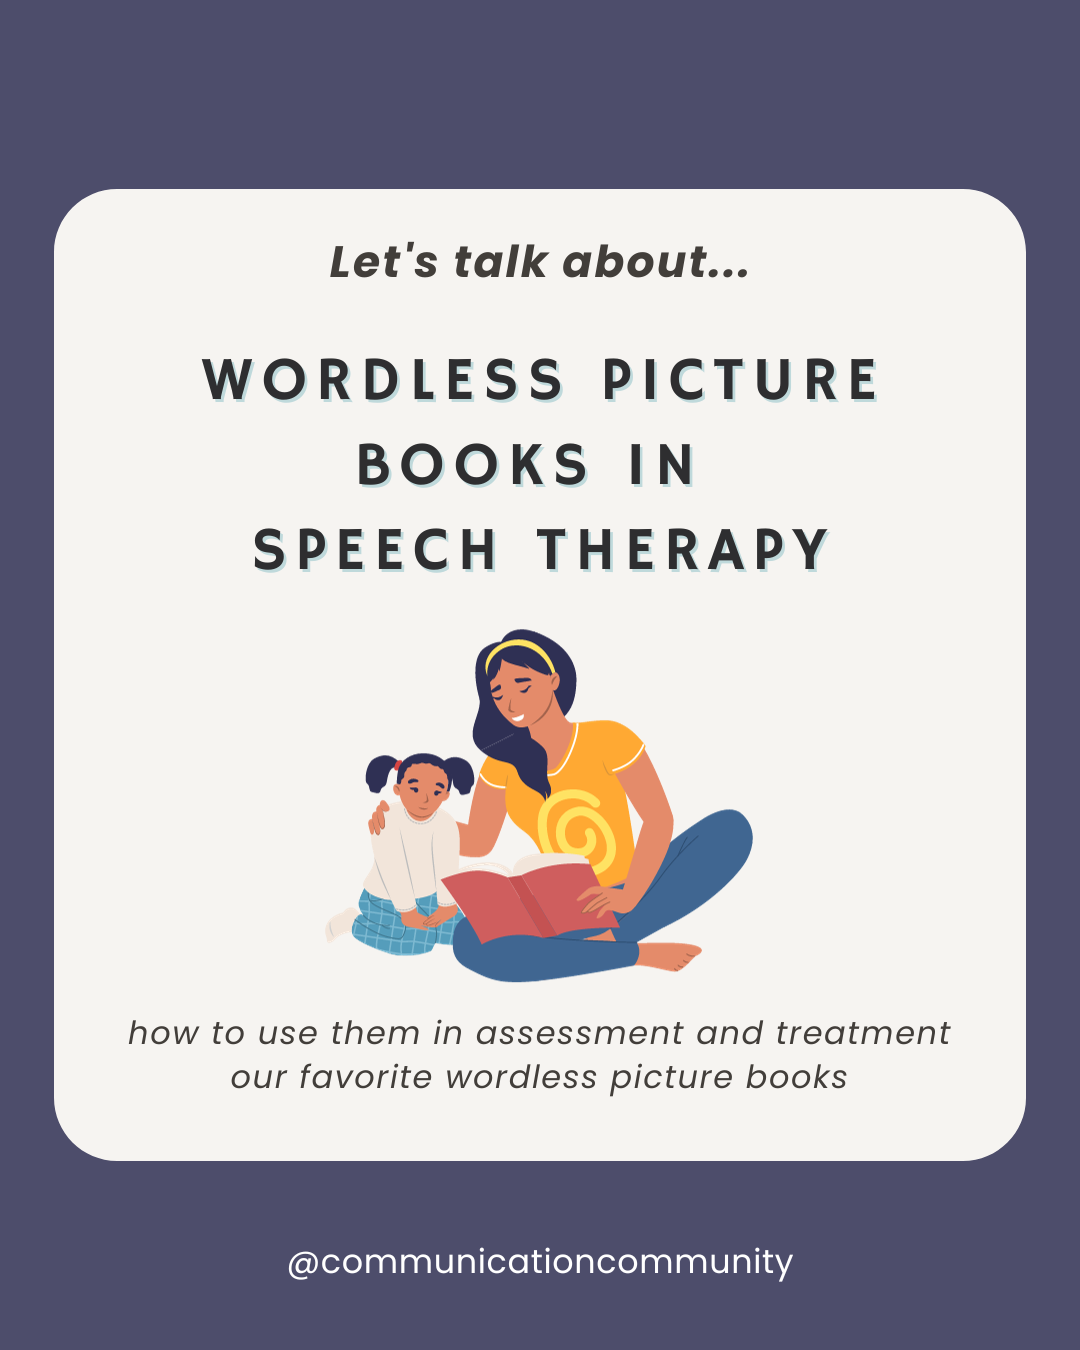 Wordless Picture Books in Speech Therapy (how to use & our favorites)